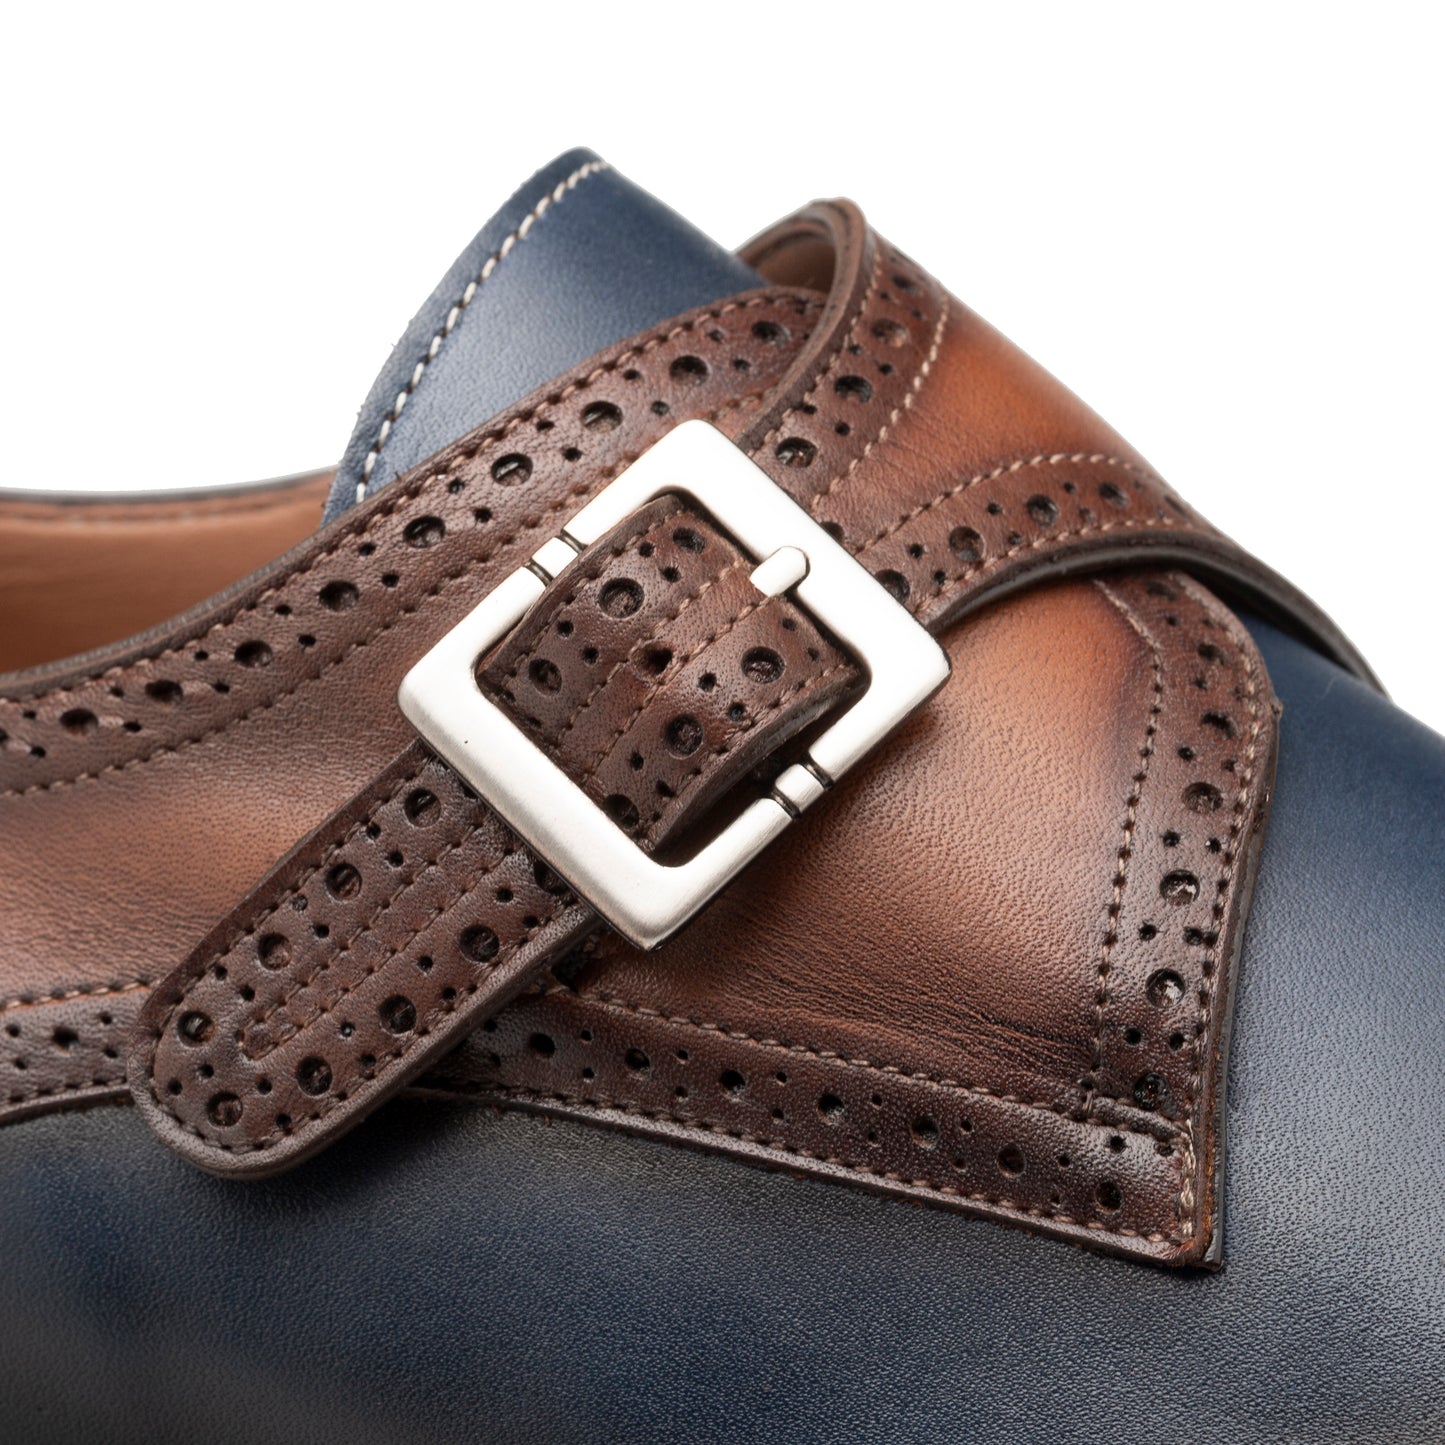 Leather Wing Tip Monk Strap